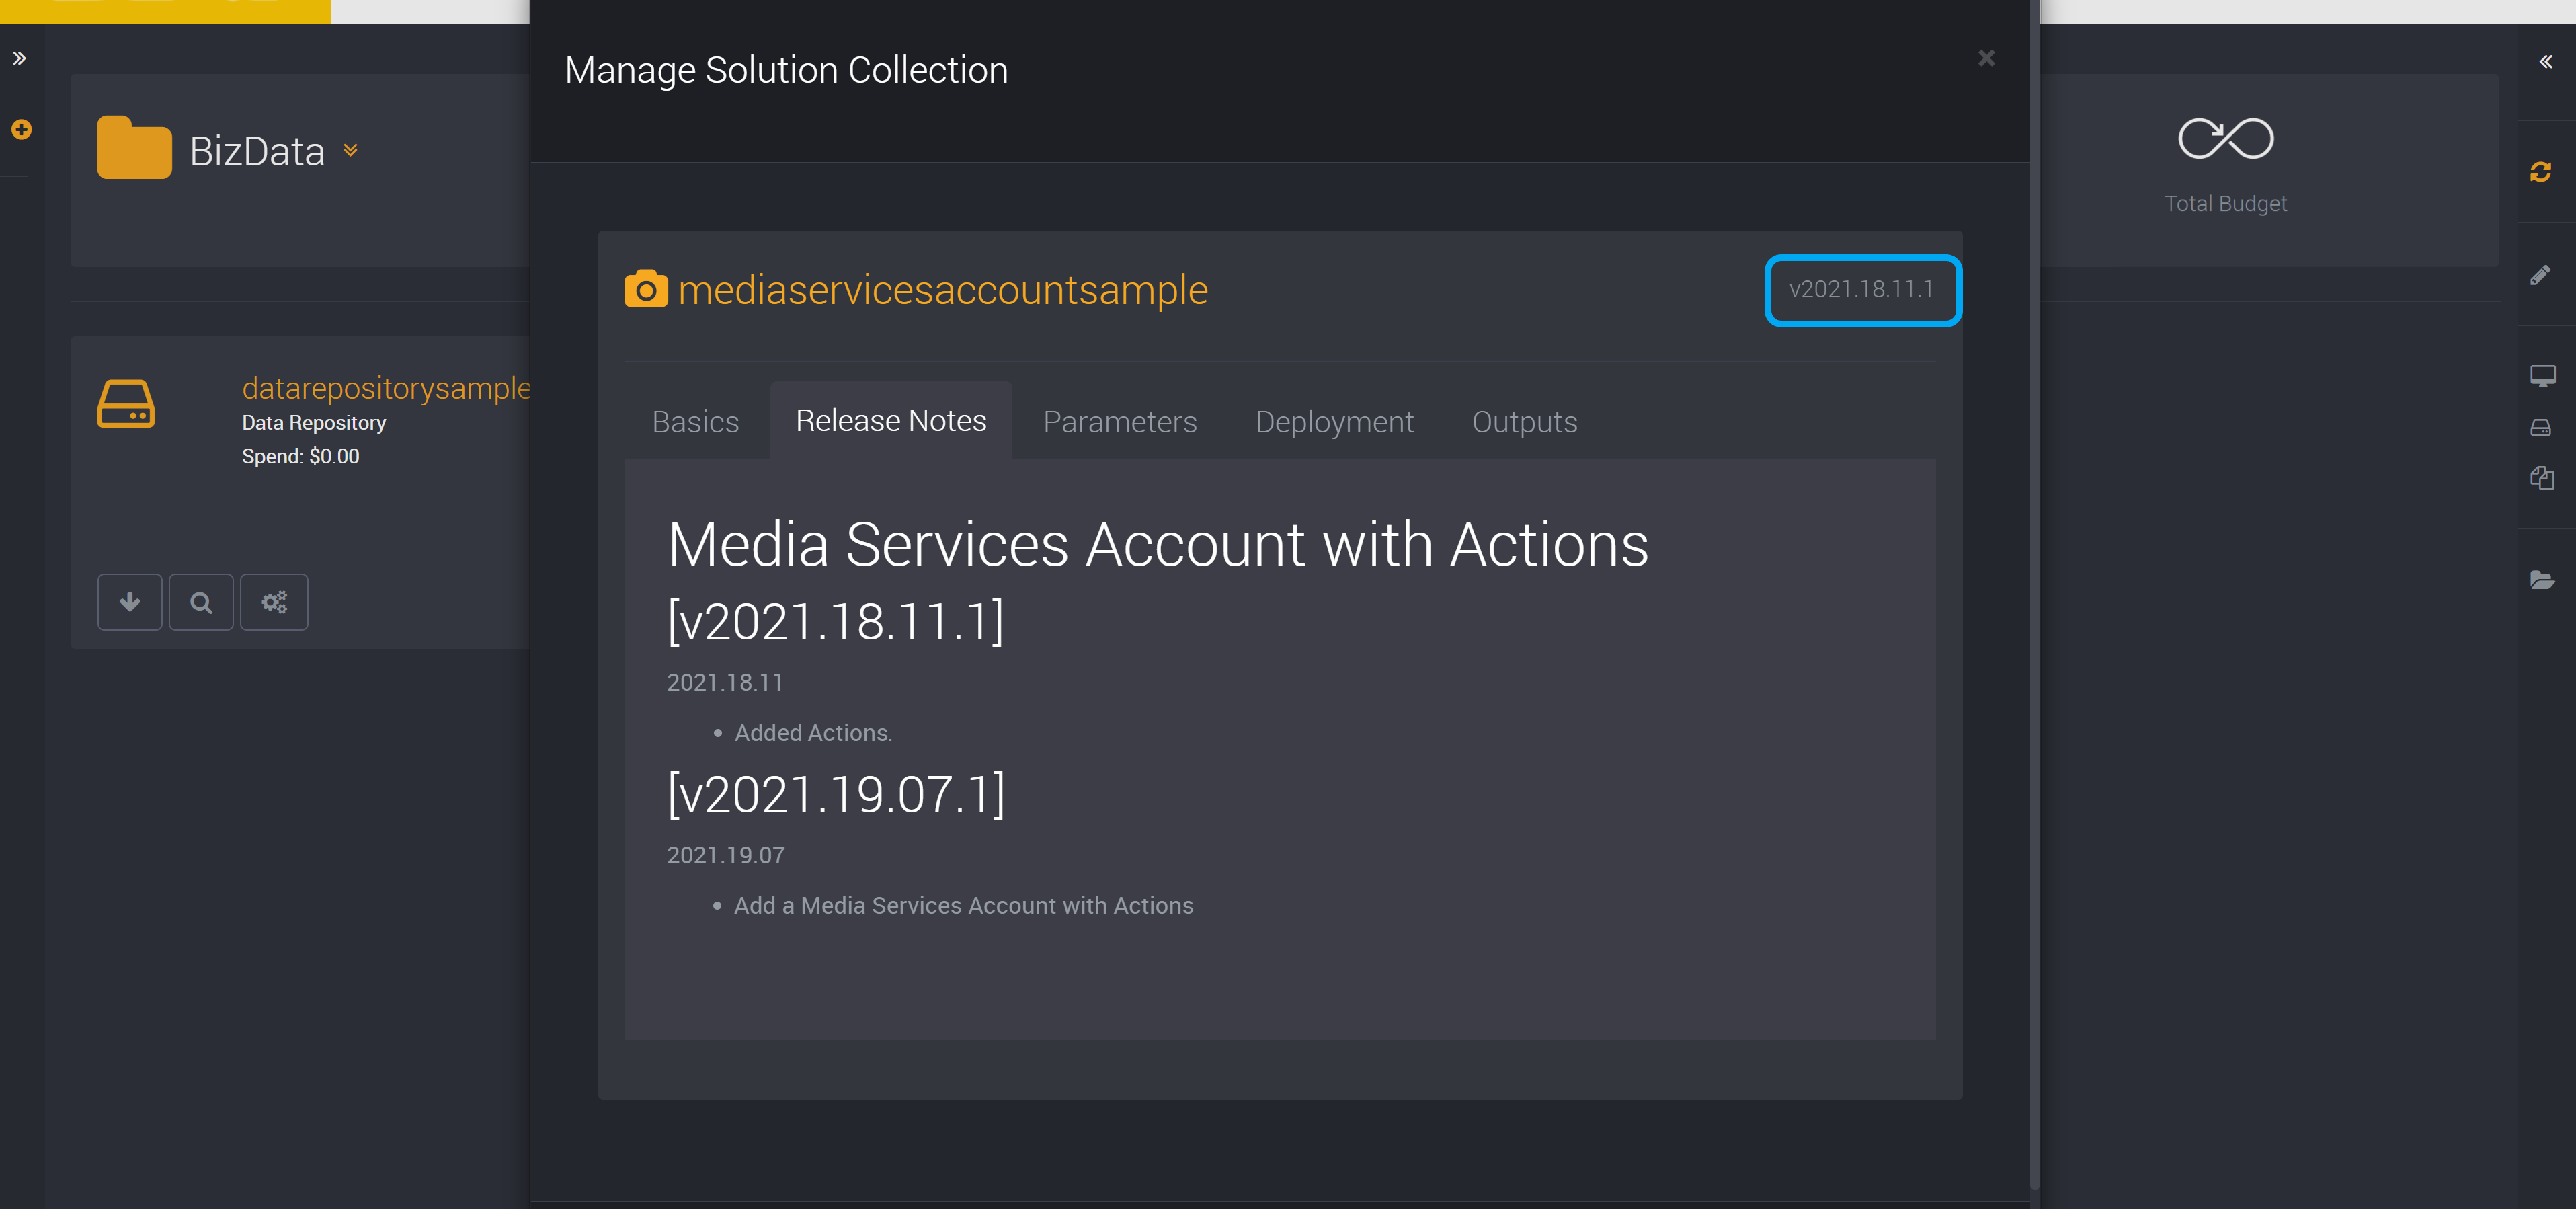 You can view the release notes when you manage the solution collection